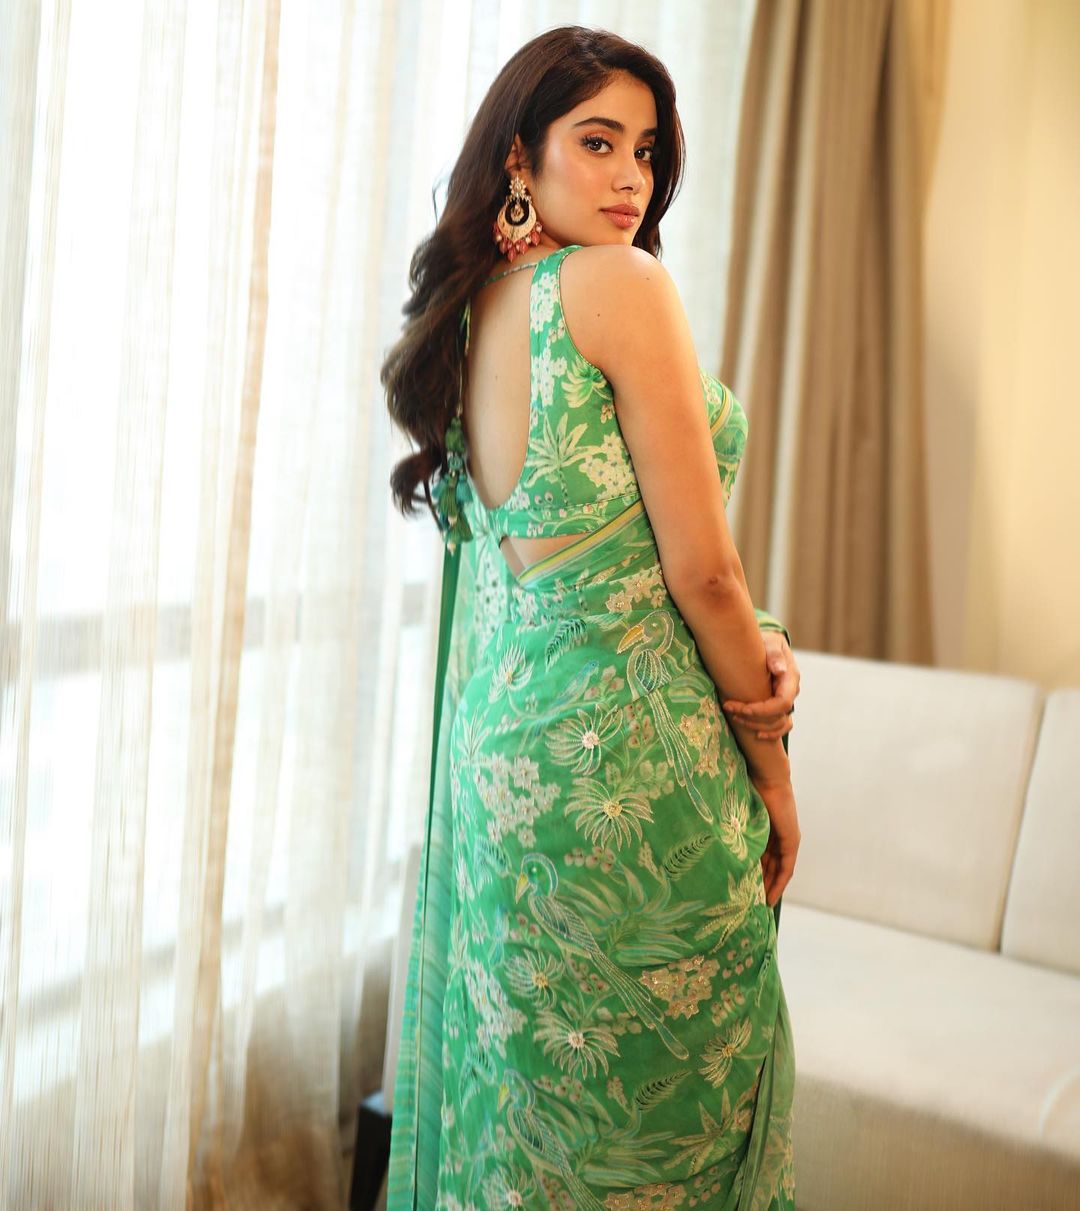 Janhvi Kapoor is an epitome of grace and poise in her latest photoshoot